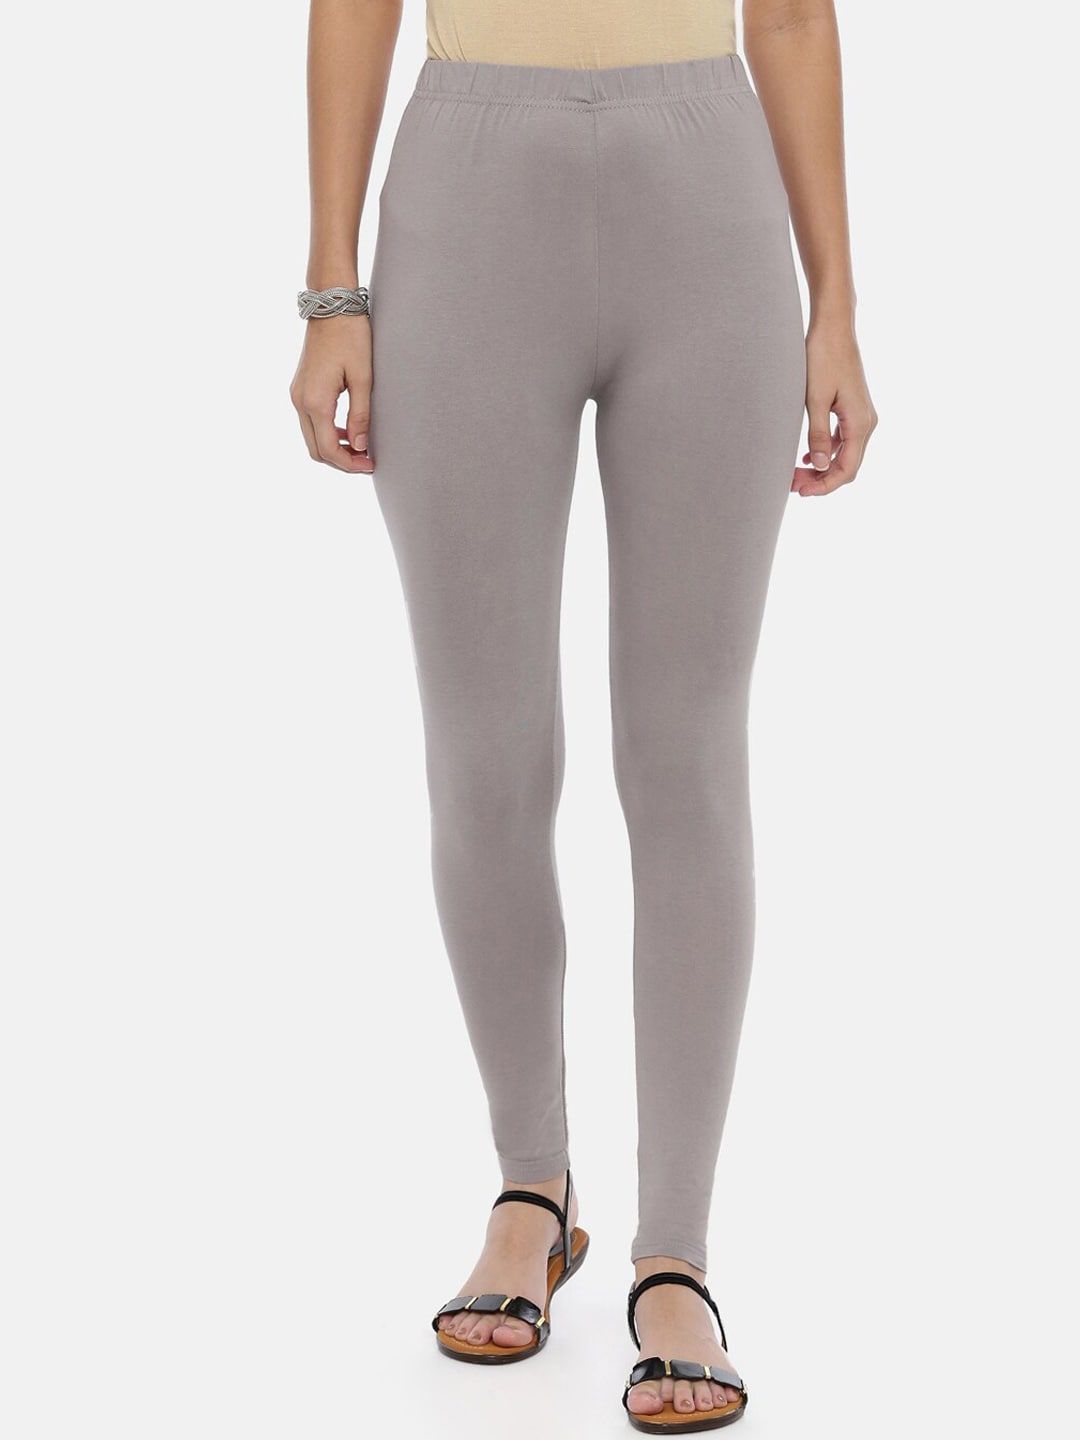 Souchii Women Grey Solid Slim-Fit Ankle-Length Leggings Price in India